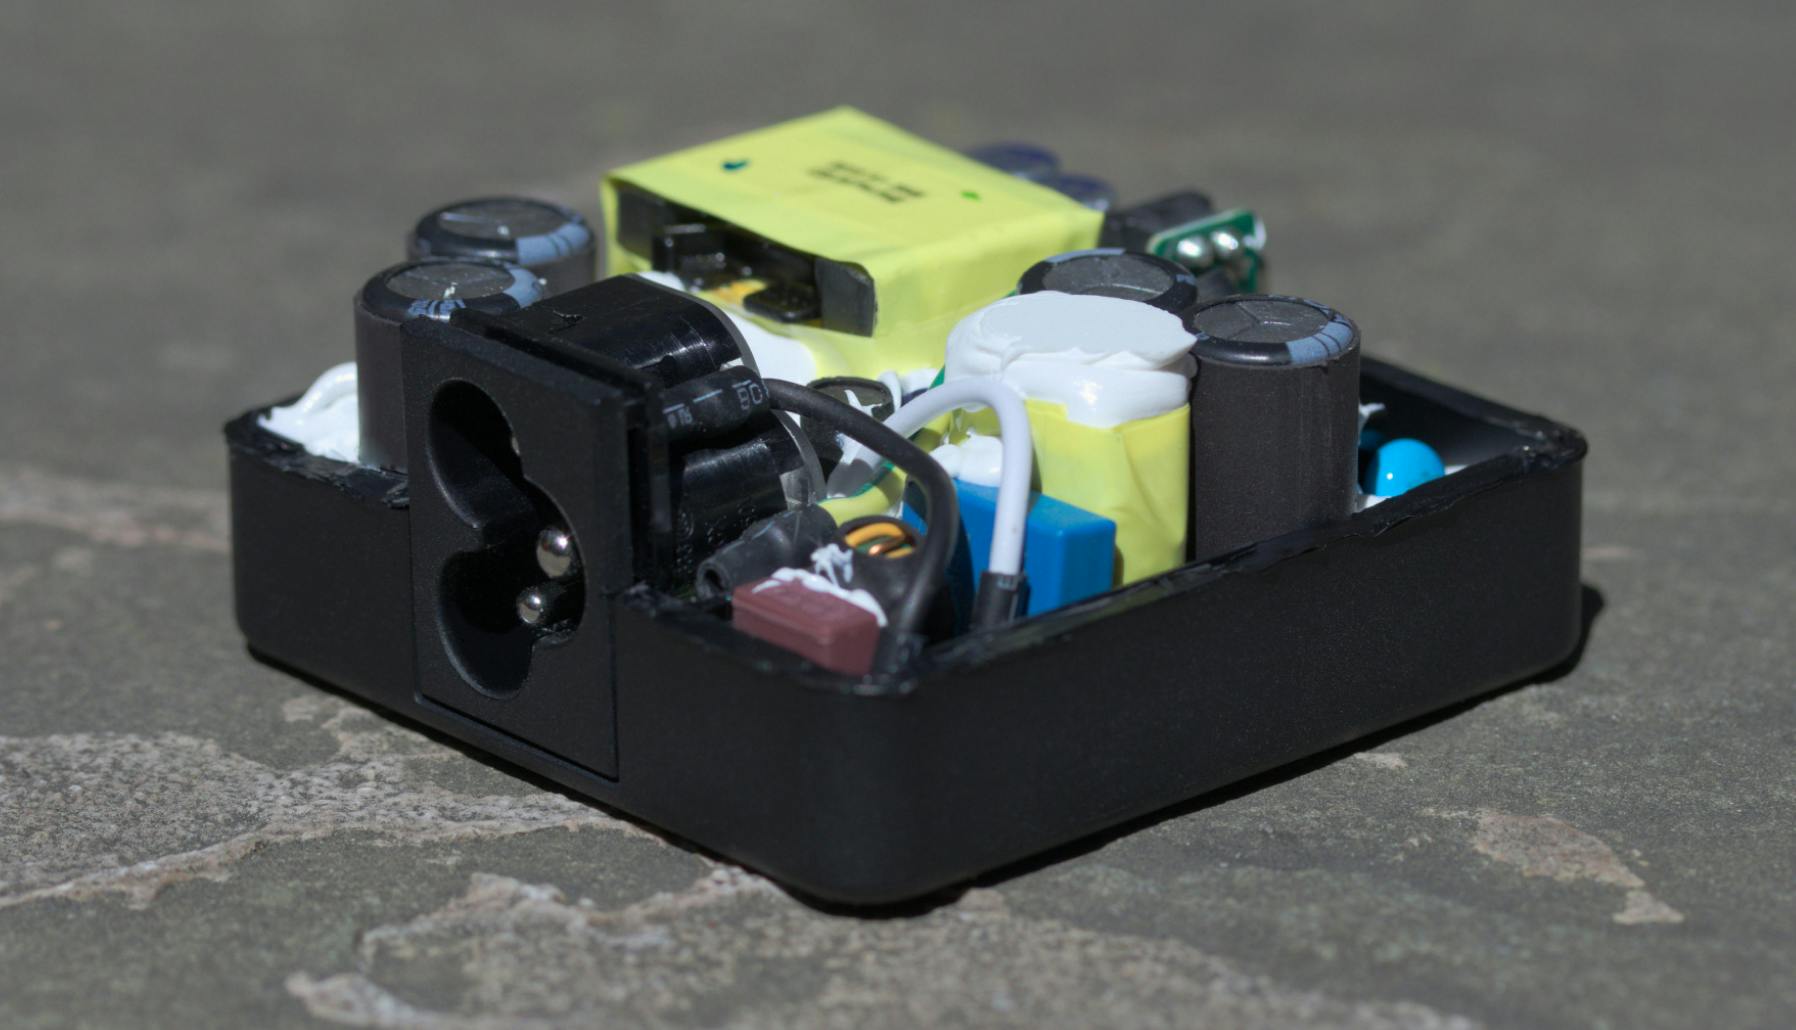 Power adapter with exposed internals